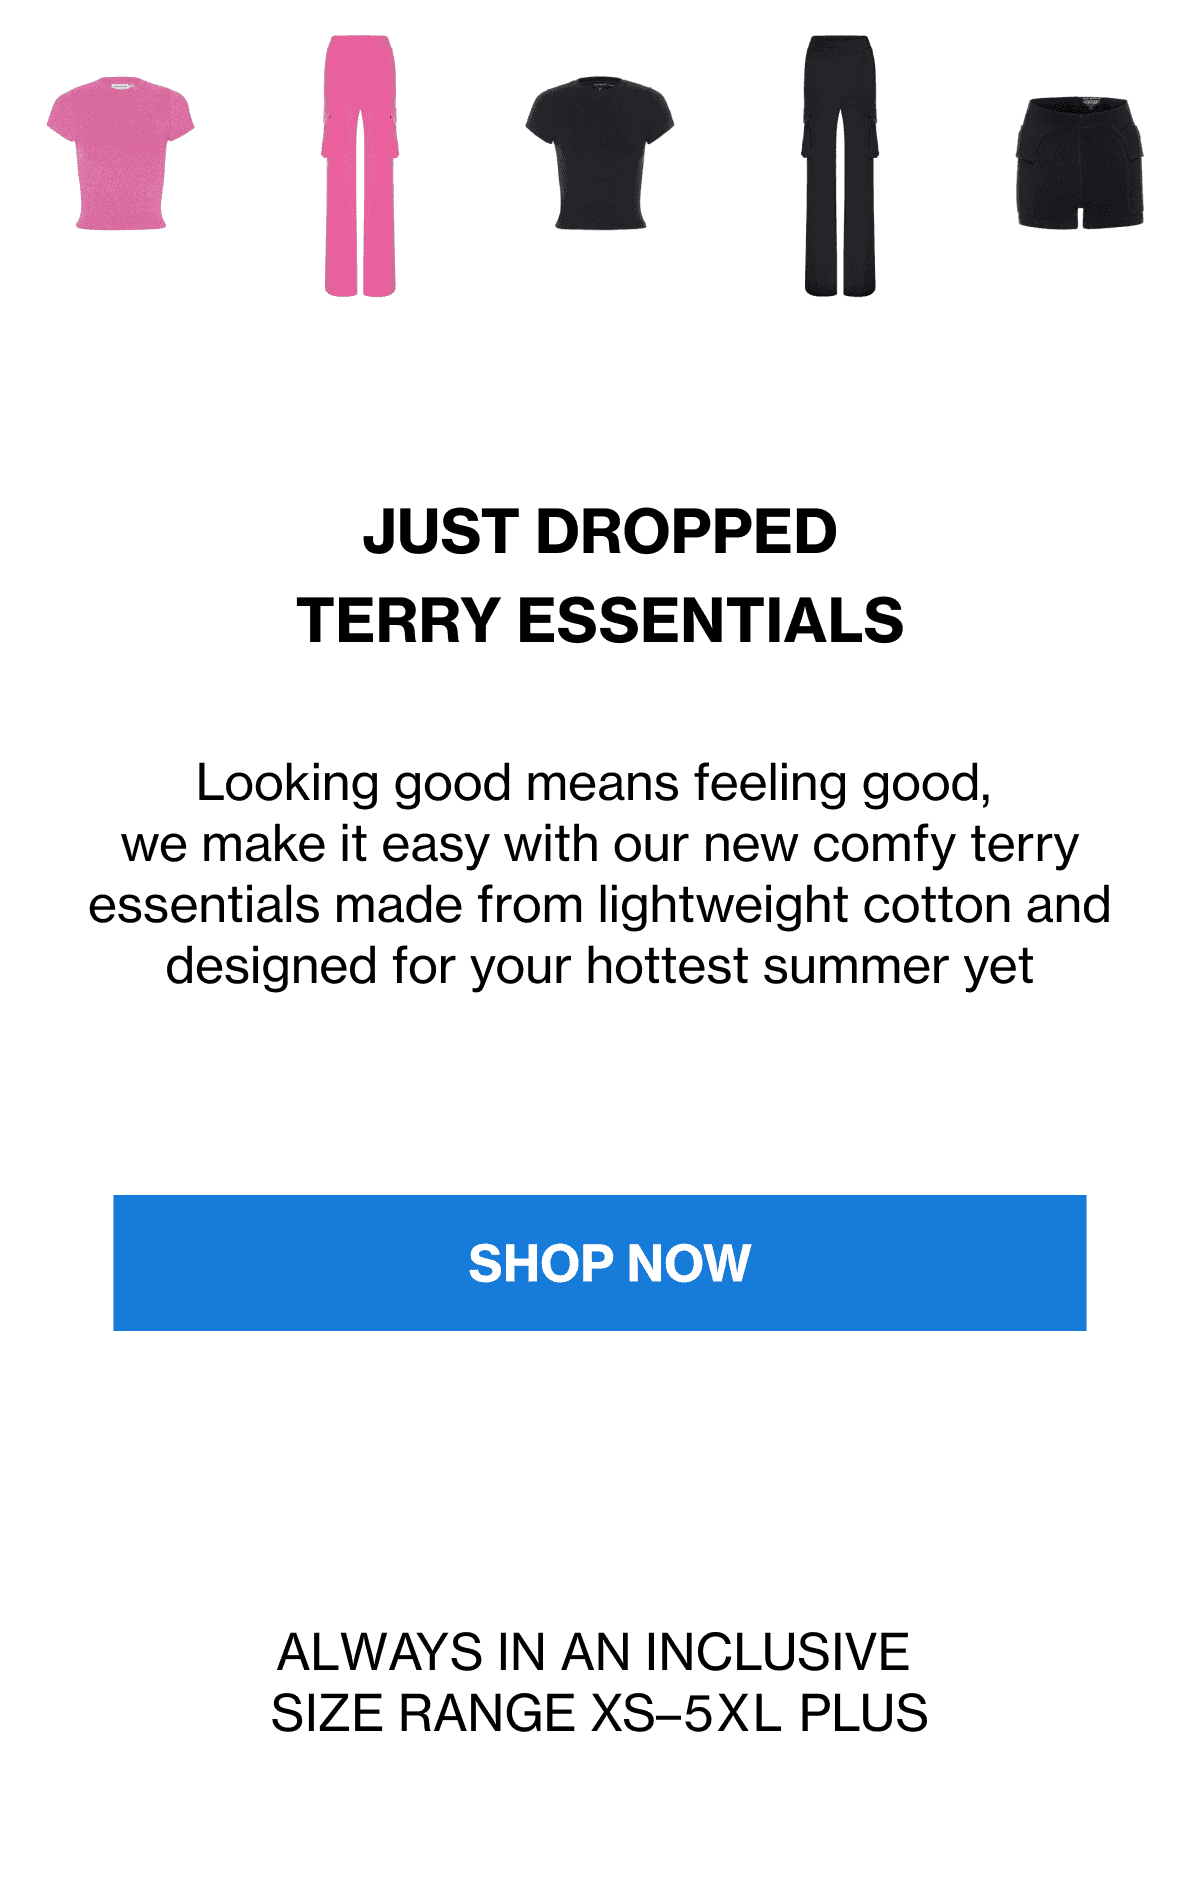 NEW TERRY ARRIVALS